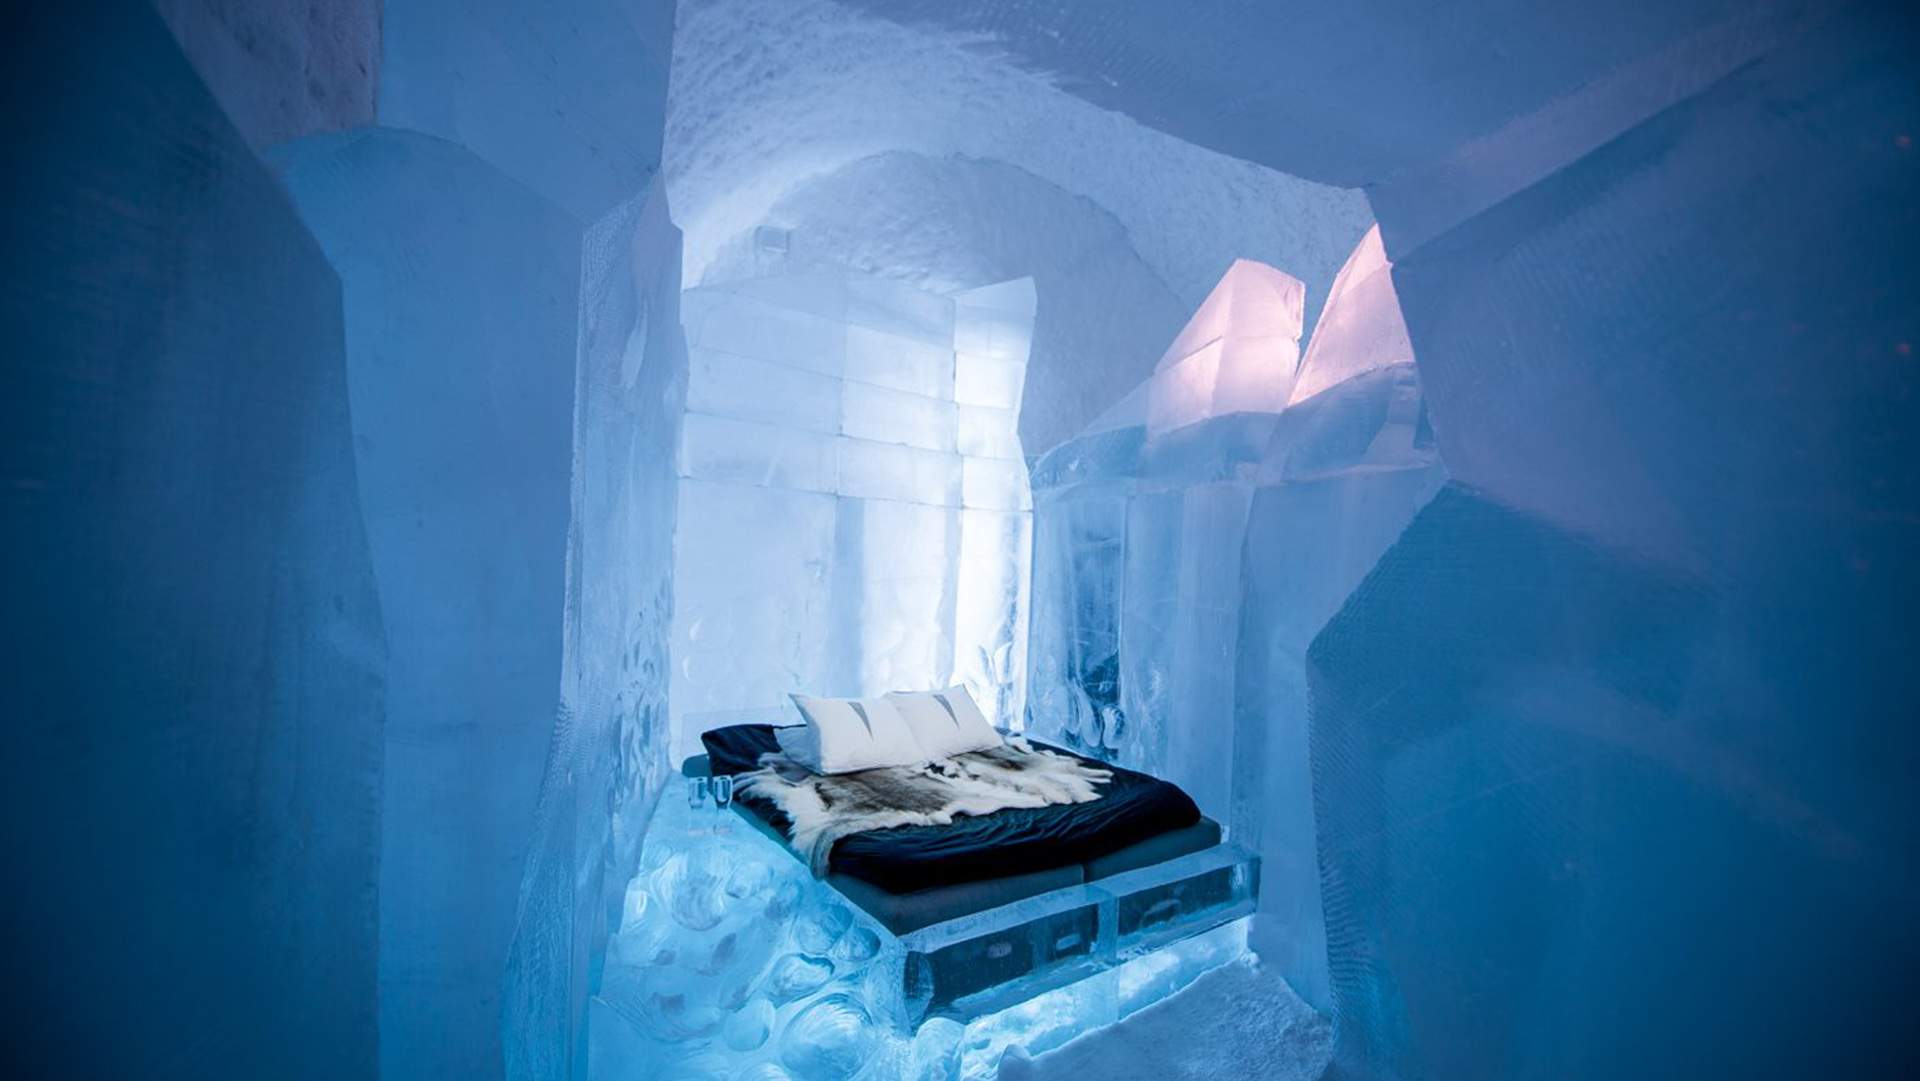 Sweden's Ice Hotel Has Unveiled Its Frosty New Artist-Created Rooms